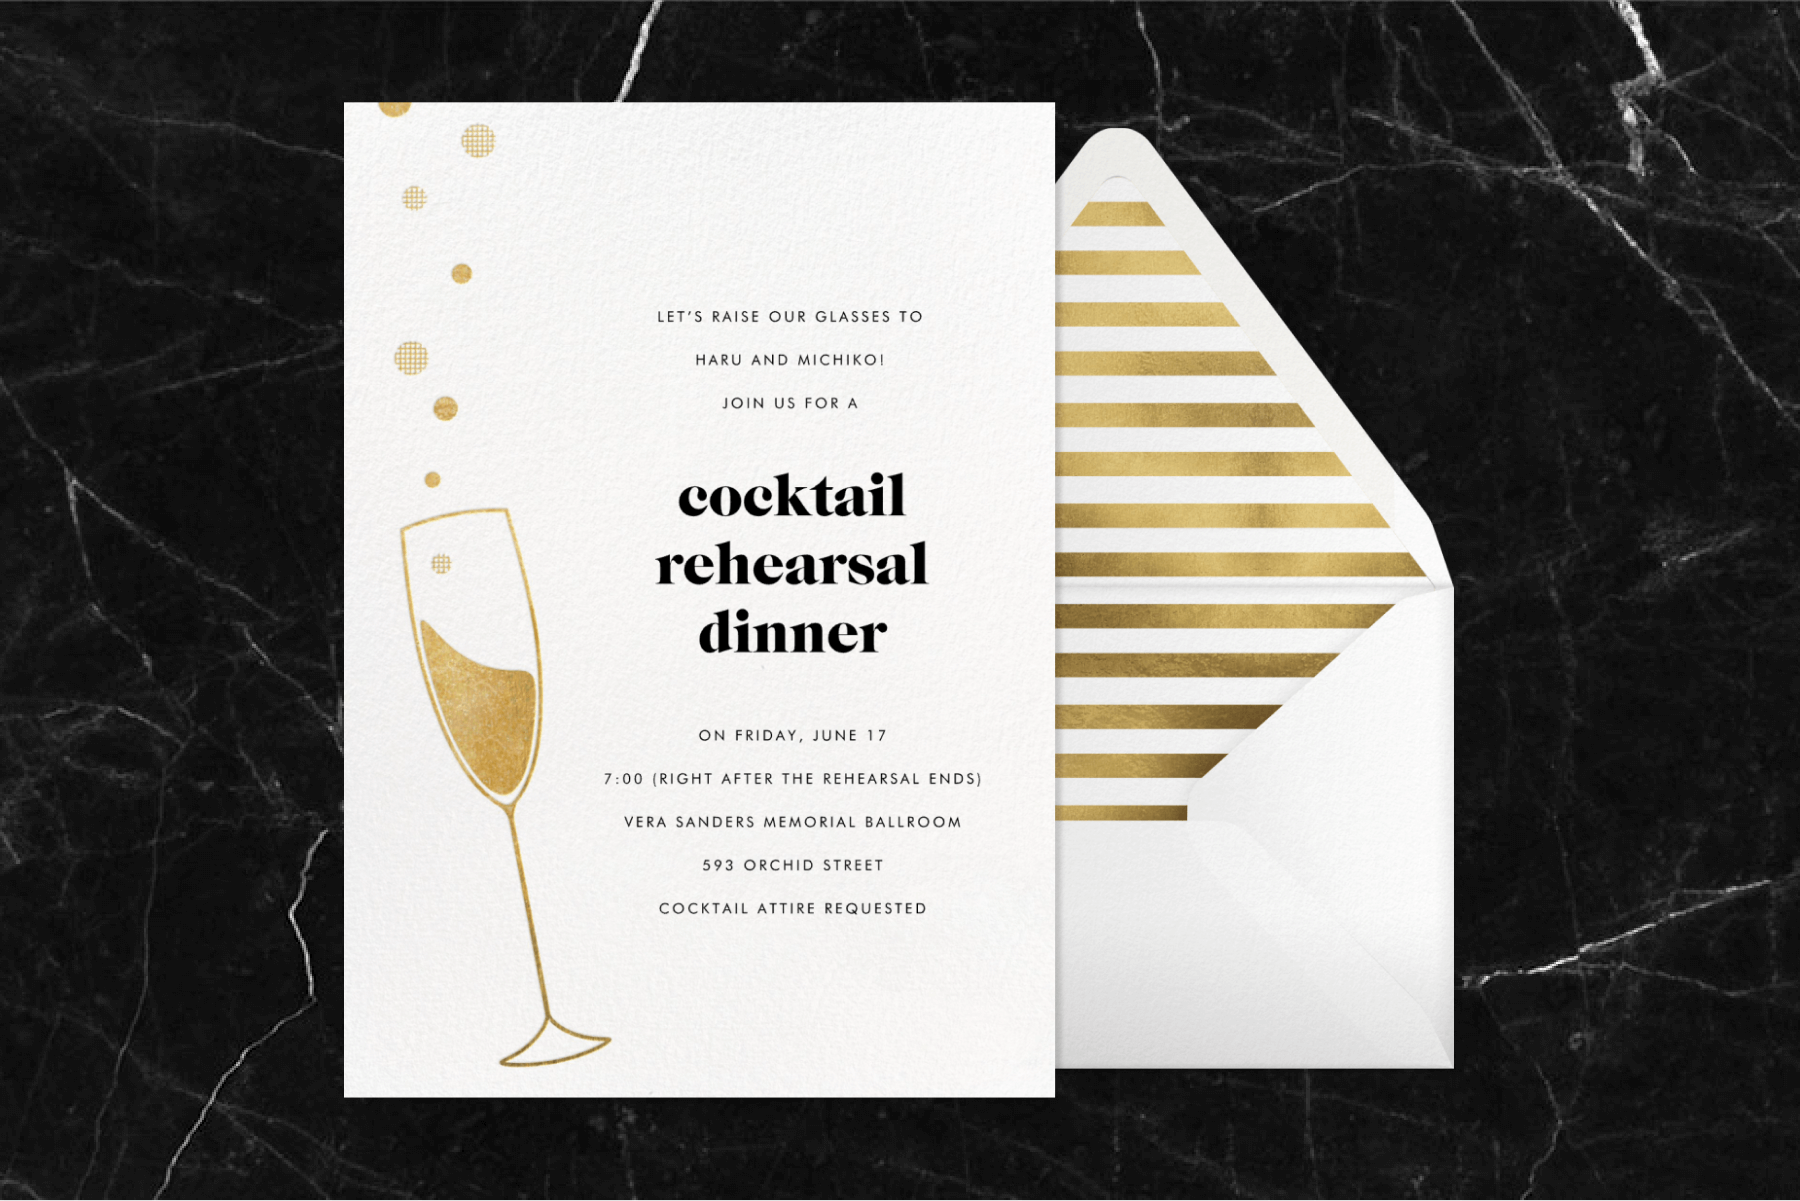 A rehearsal dinner invitation with an illustration of a Champagne glass and a gold and white striped envelope.